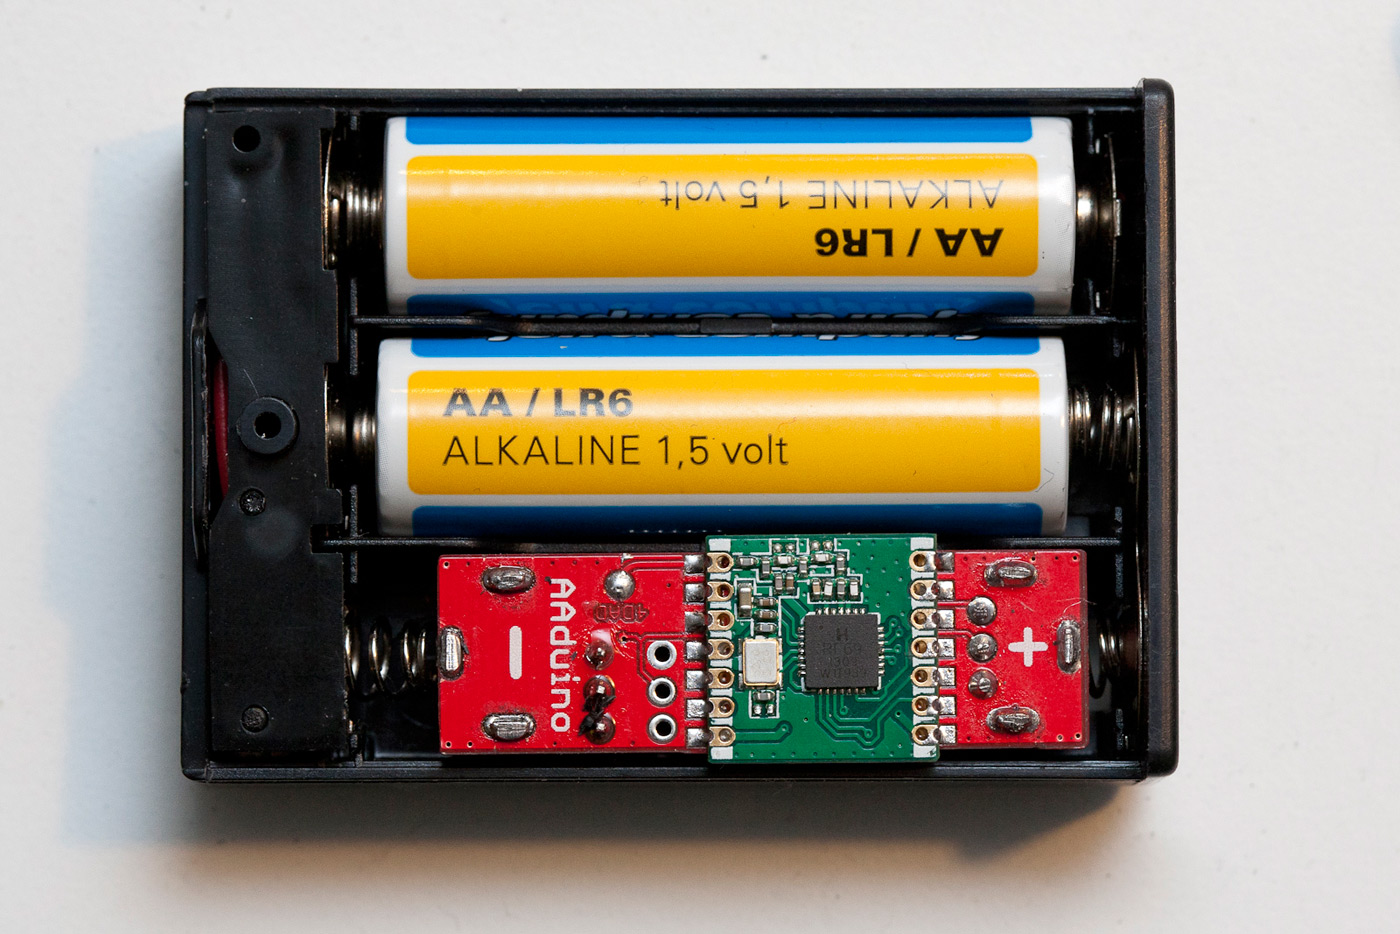 Arduino clone is as small as an AA battery